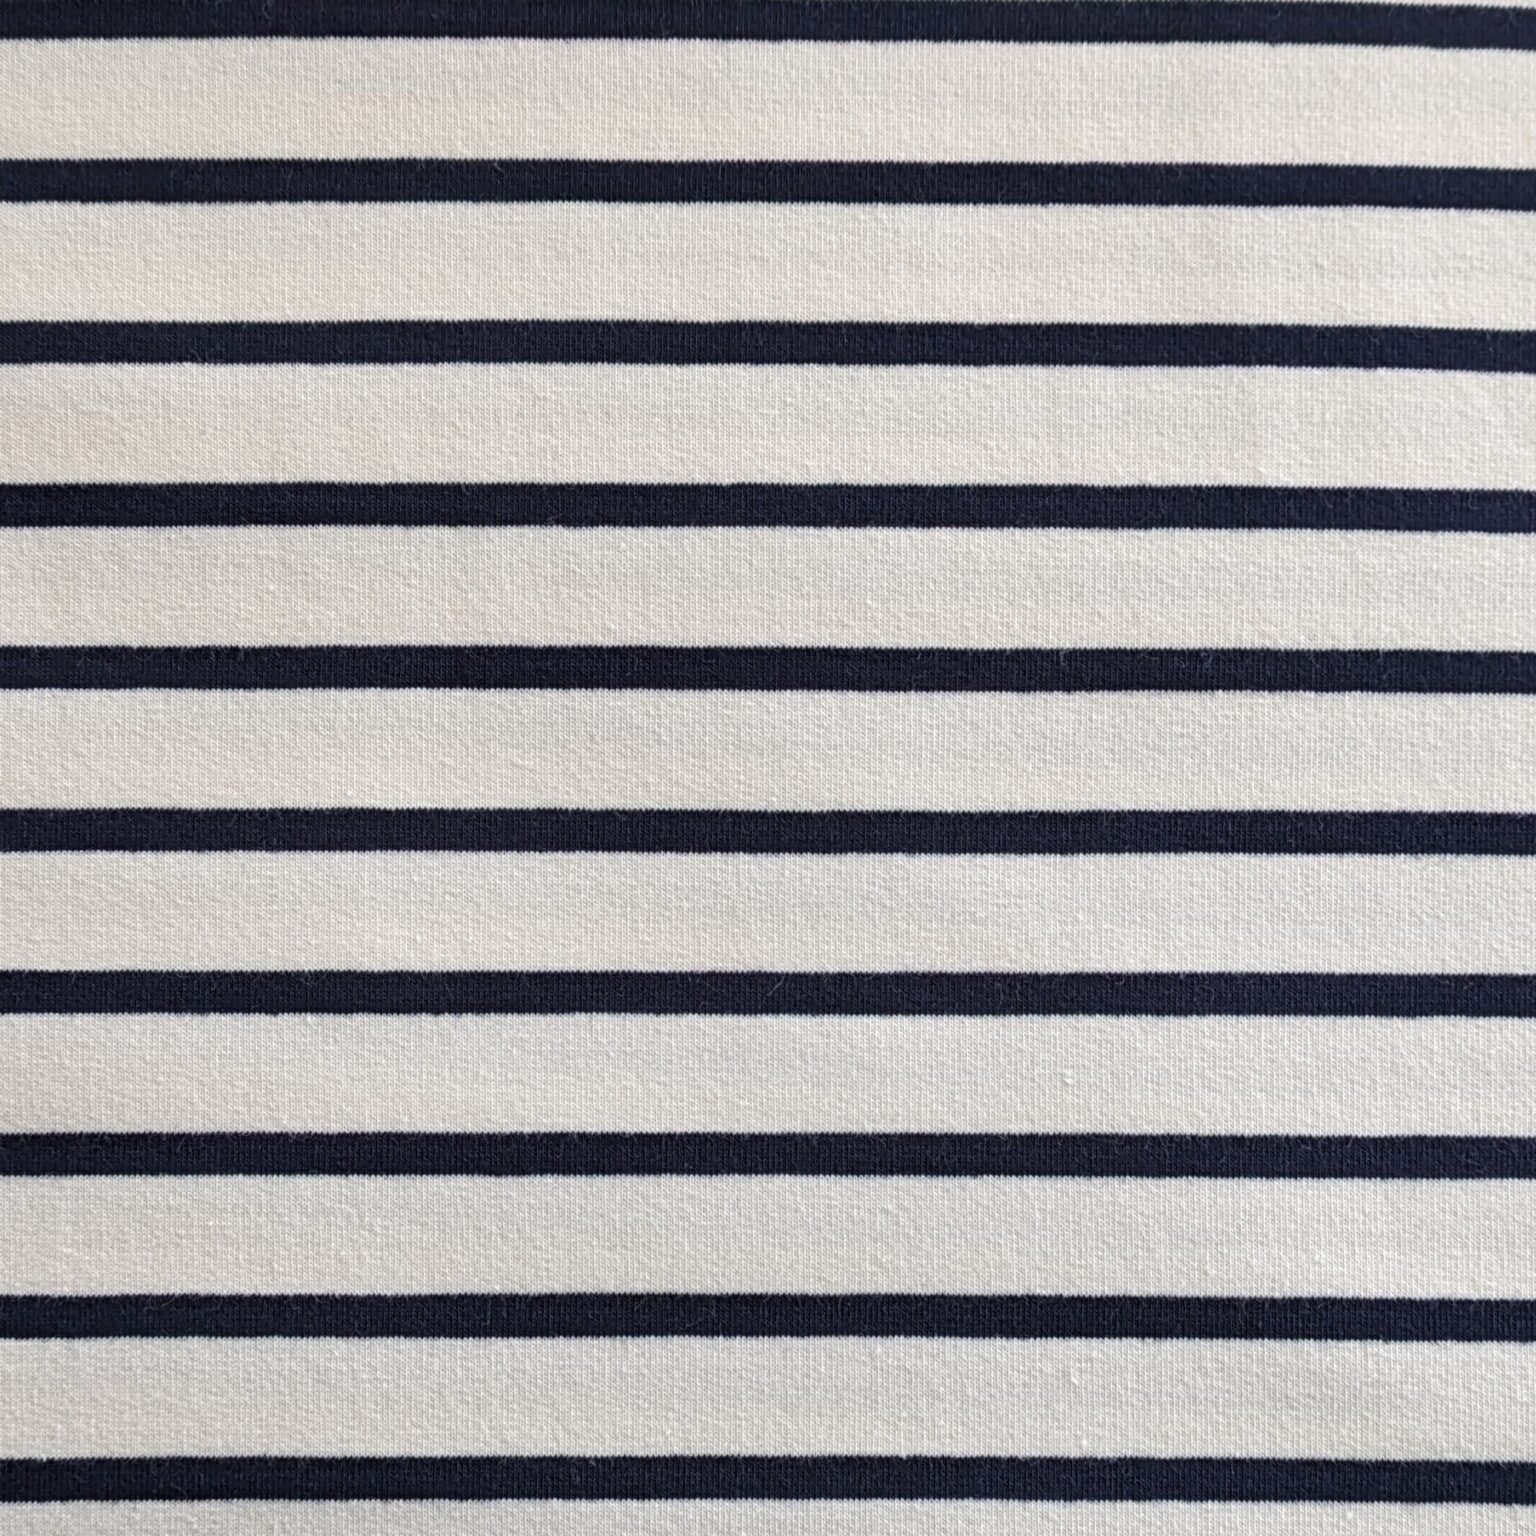 Cotton Jersey Fabric French Terry - Yarn Dyed Stripe - Cream with Navy Blue - Four Way Stretch - 155cm Wide